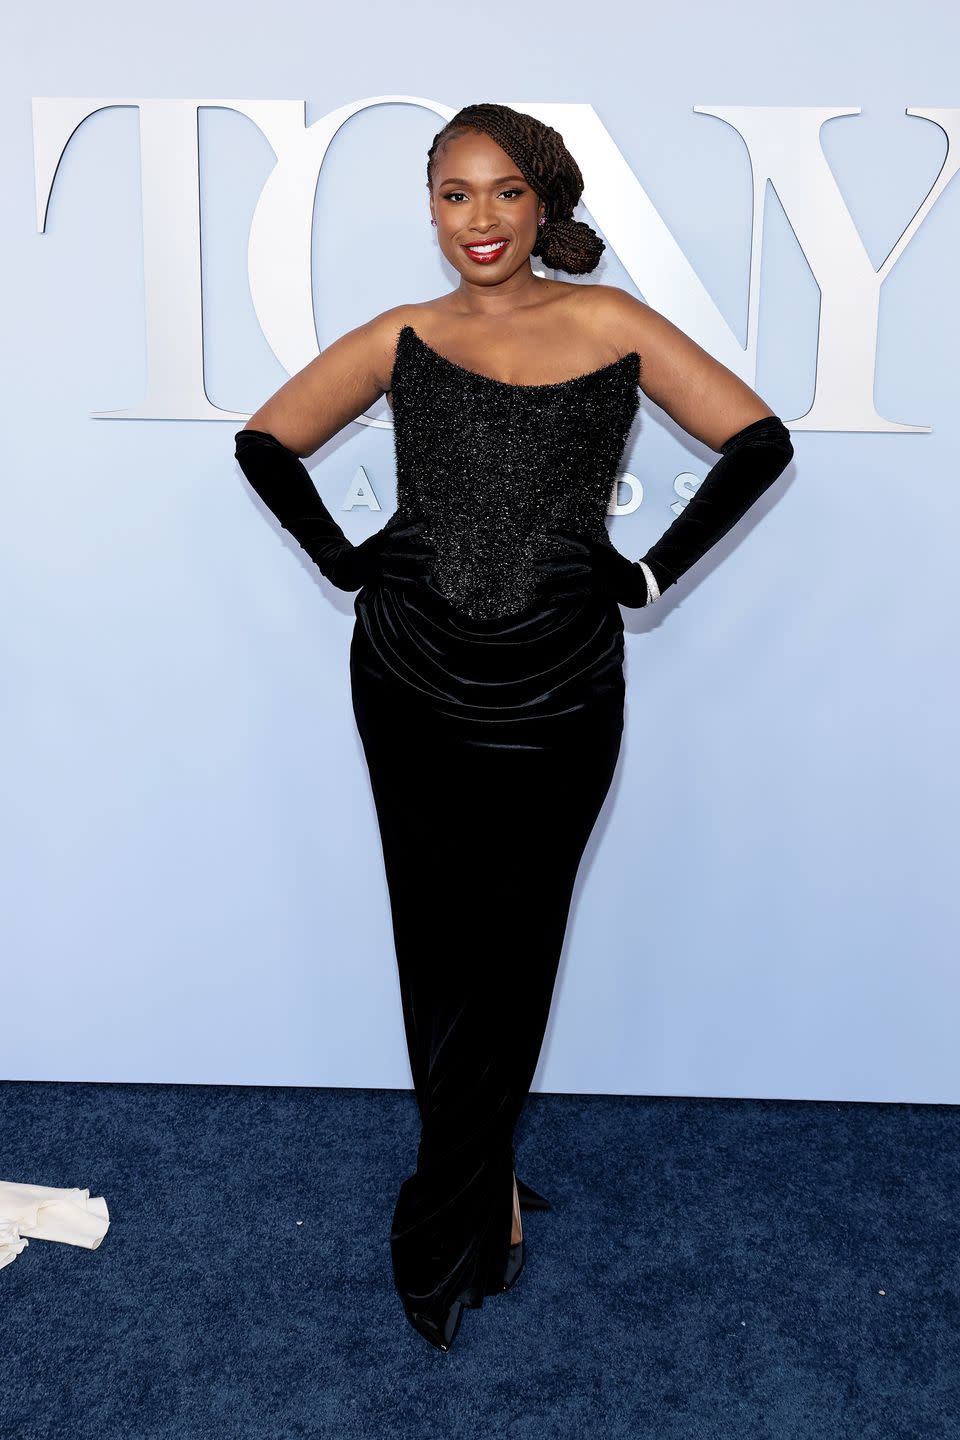 new york, new york june 16 jennifer hudson attends the the 77th annual tony awards at david h koch theater at lincoln center on june 16, 2024 in new york city photo by dimitrios kambourisgetty images for tony awards productions